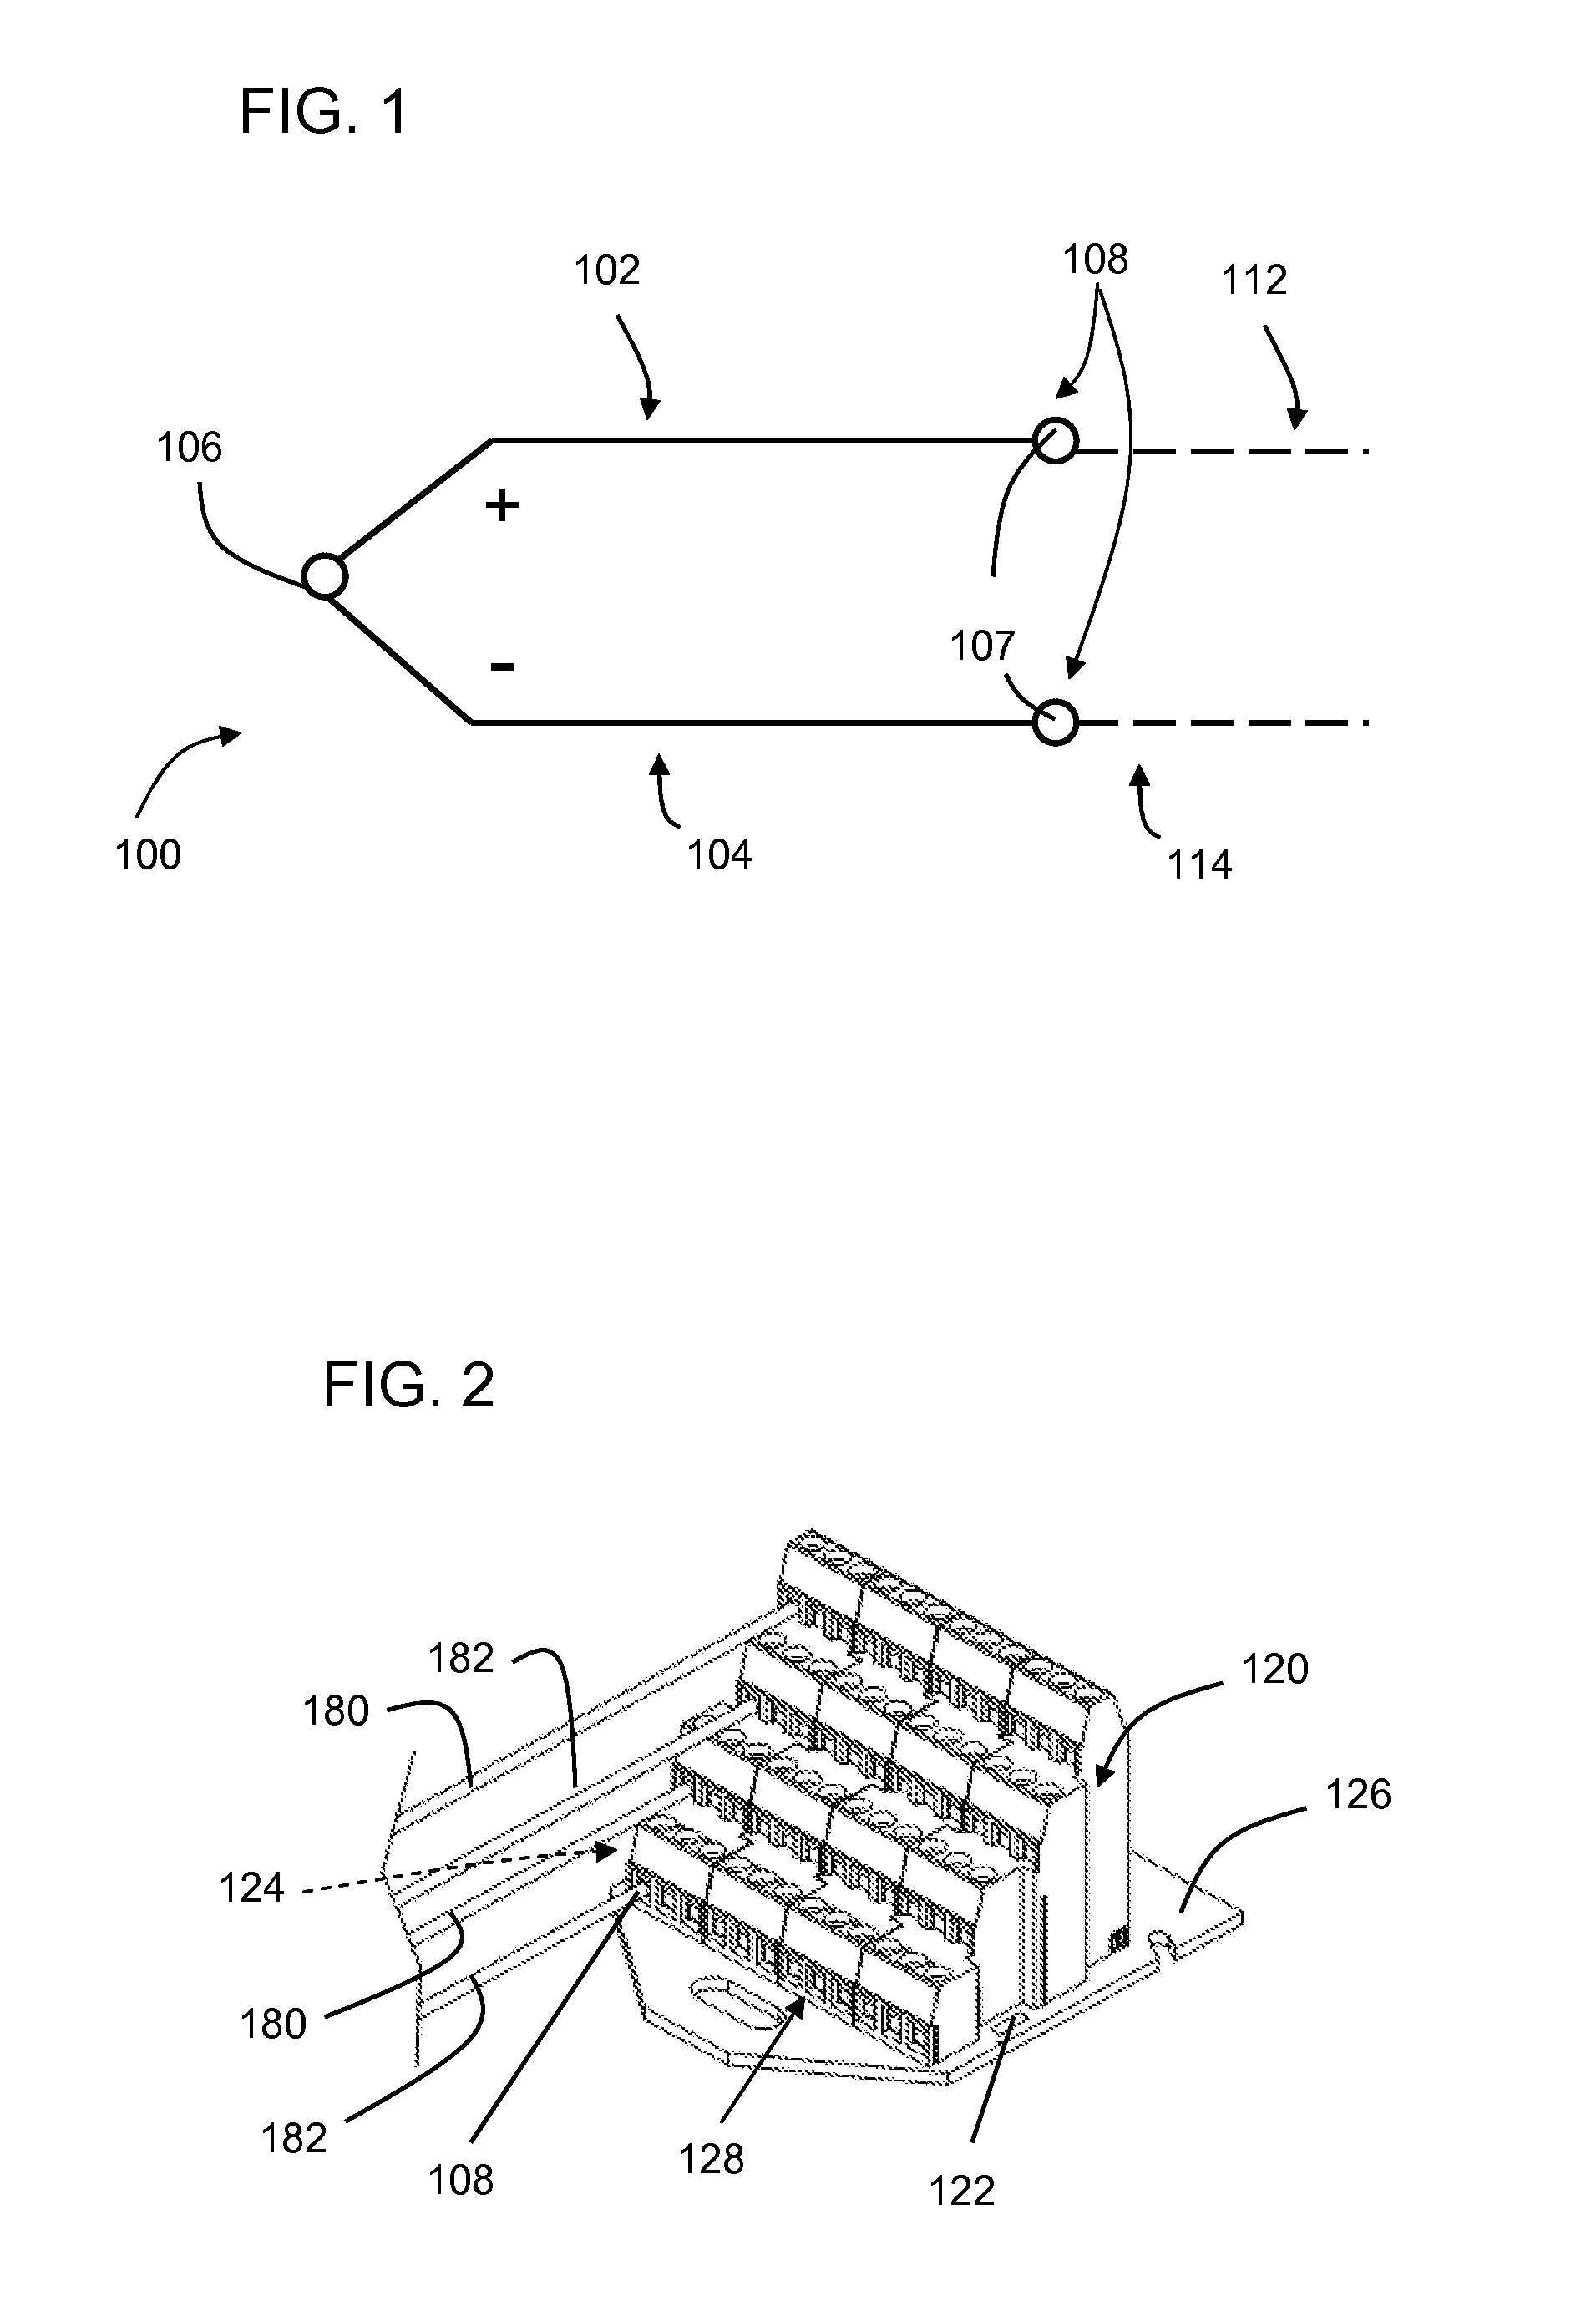 Integrated cold junction compensation circuit for thermocouple connections